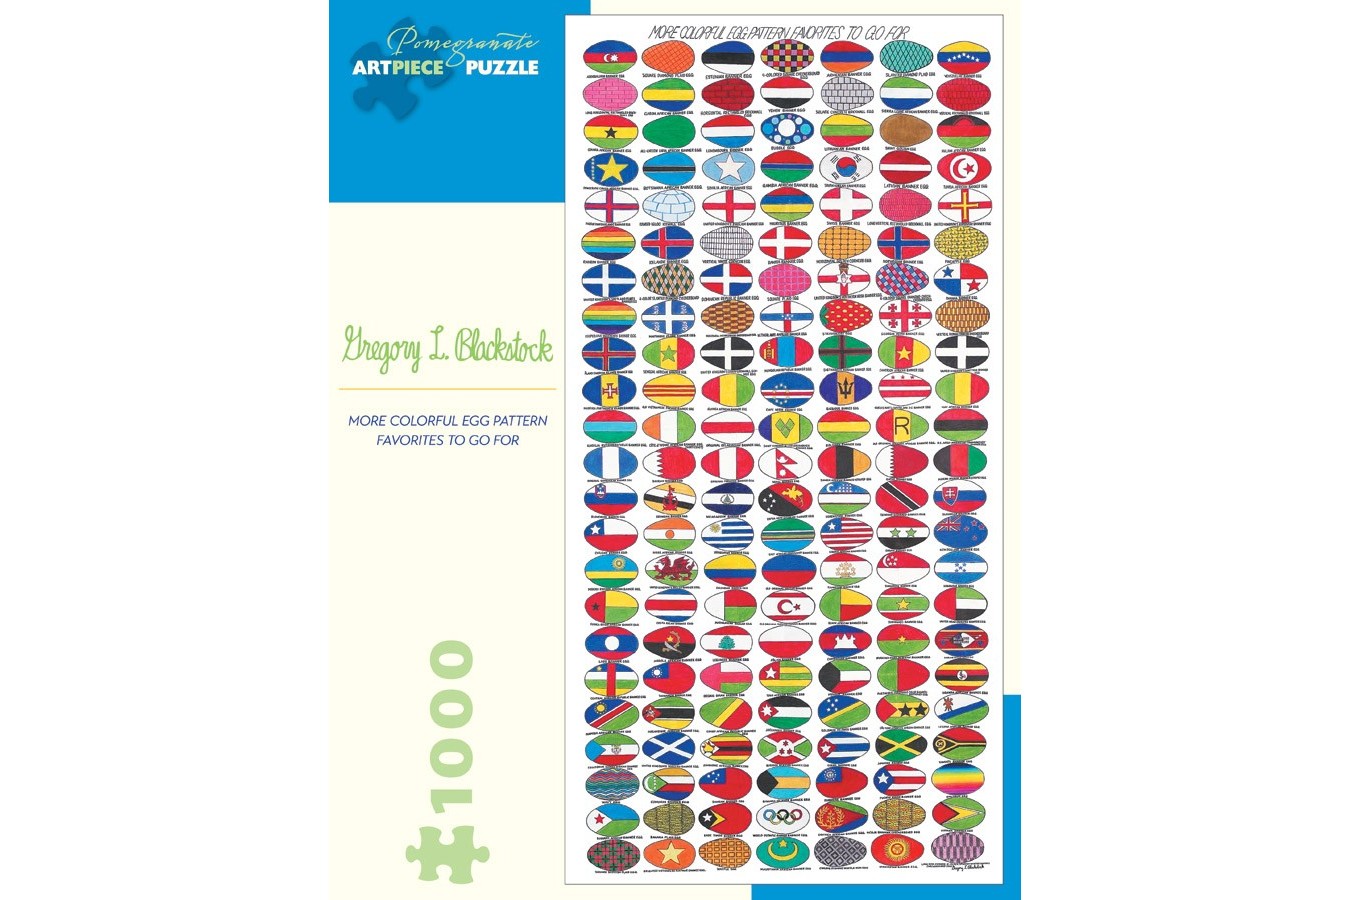 Puzzle Pomegranate - Gregory L. Blackstock: More Colorful Egg Pattern Favorites to Go For, 2005, 1.000 piese (AA888)